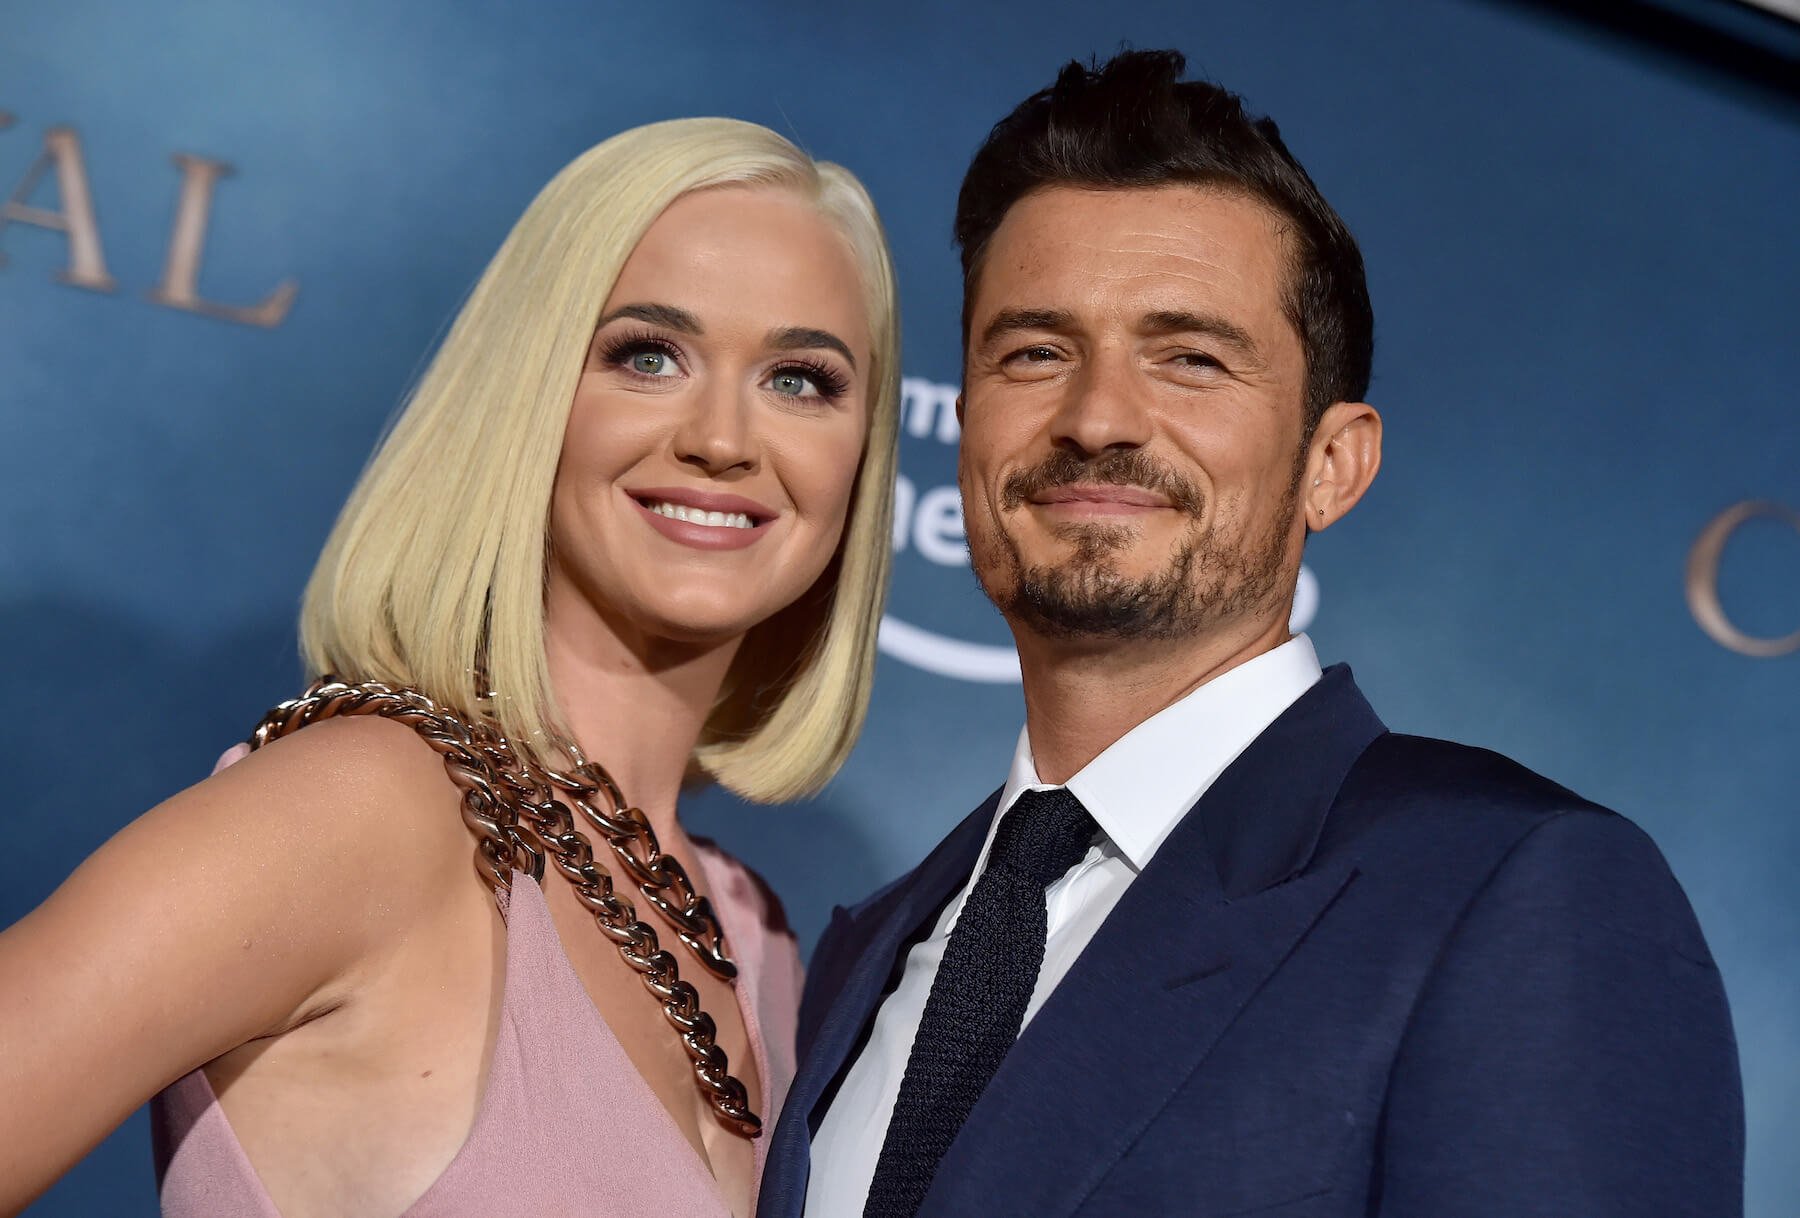 Katy Perry and Orlando Bloom’s Engagement Is ‘Fragile,’ Psychologist Says: ‘Marriage Might Be Too Complex’